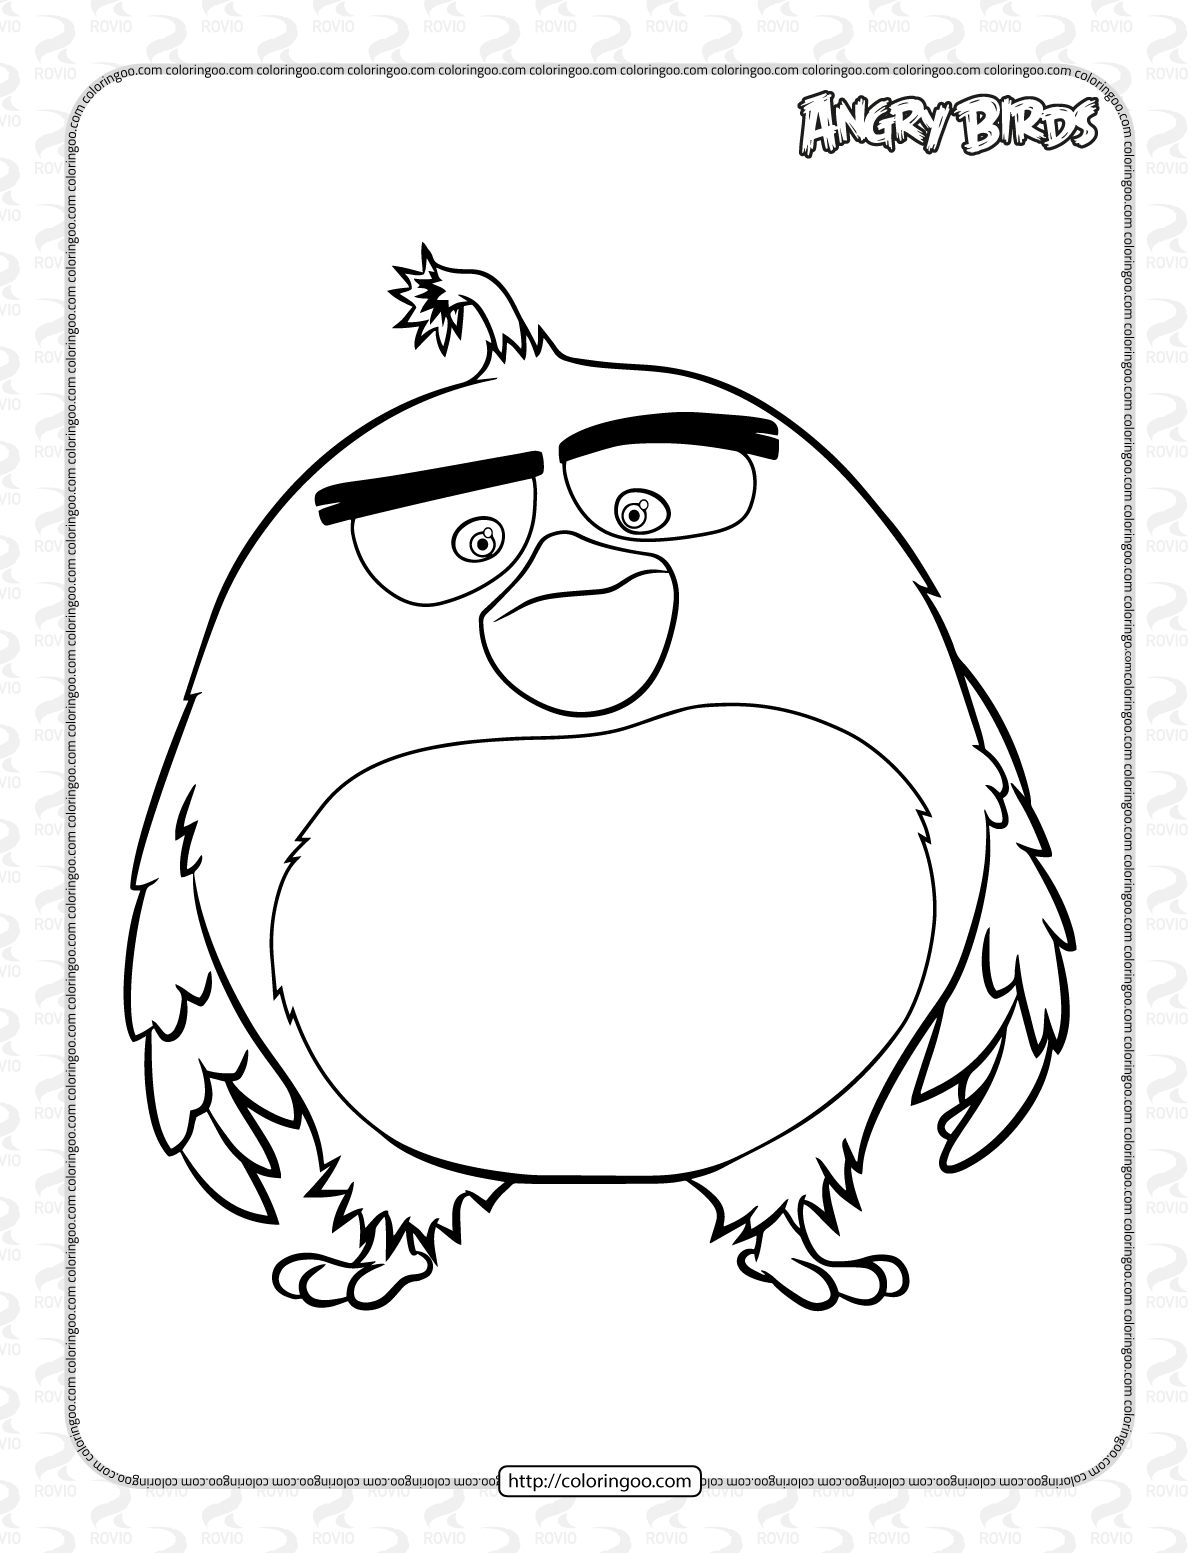 angry birds bomb coloring pages